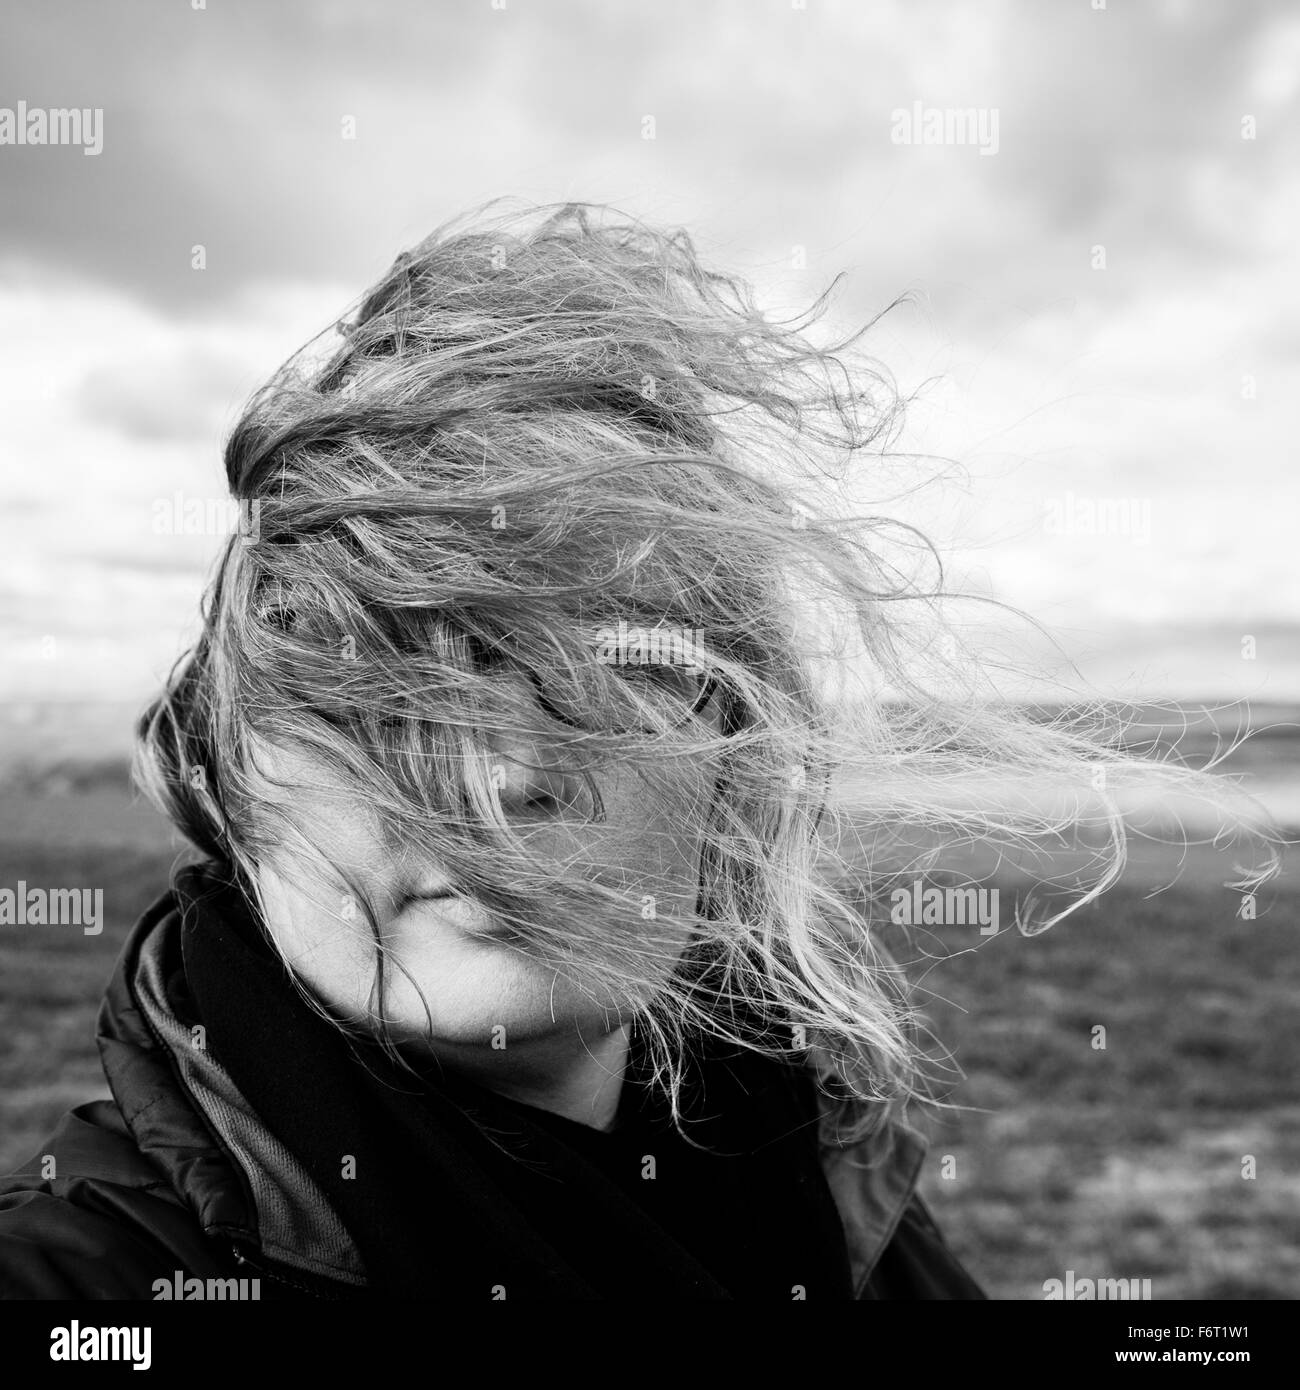 Caucasian woman with hair blowing in wind Stock Photo